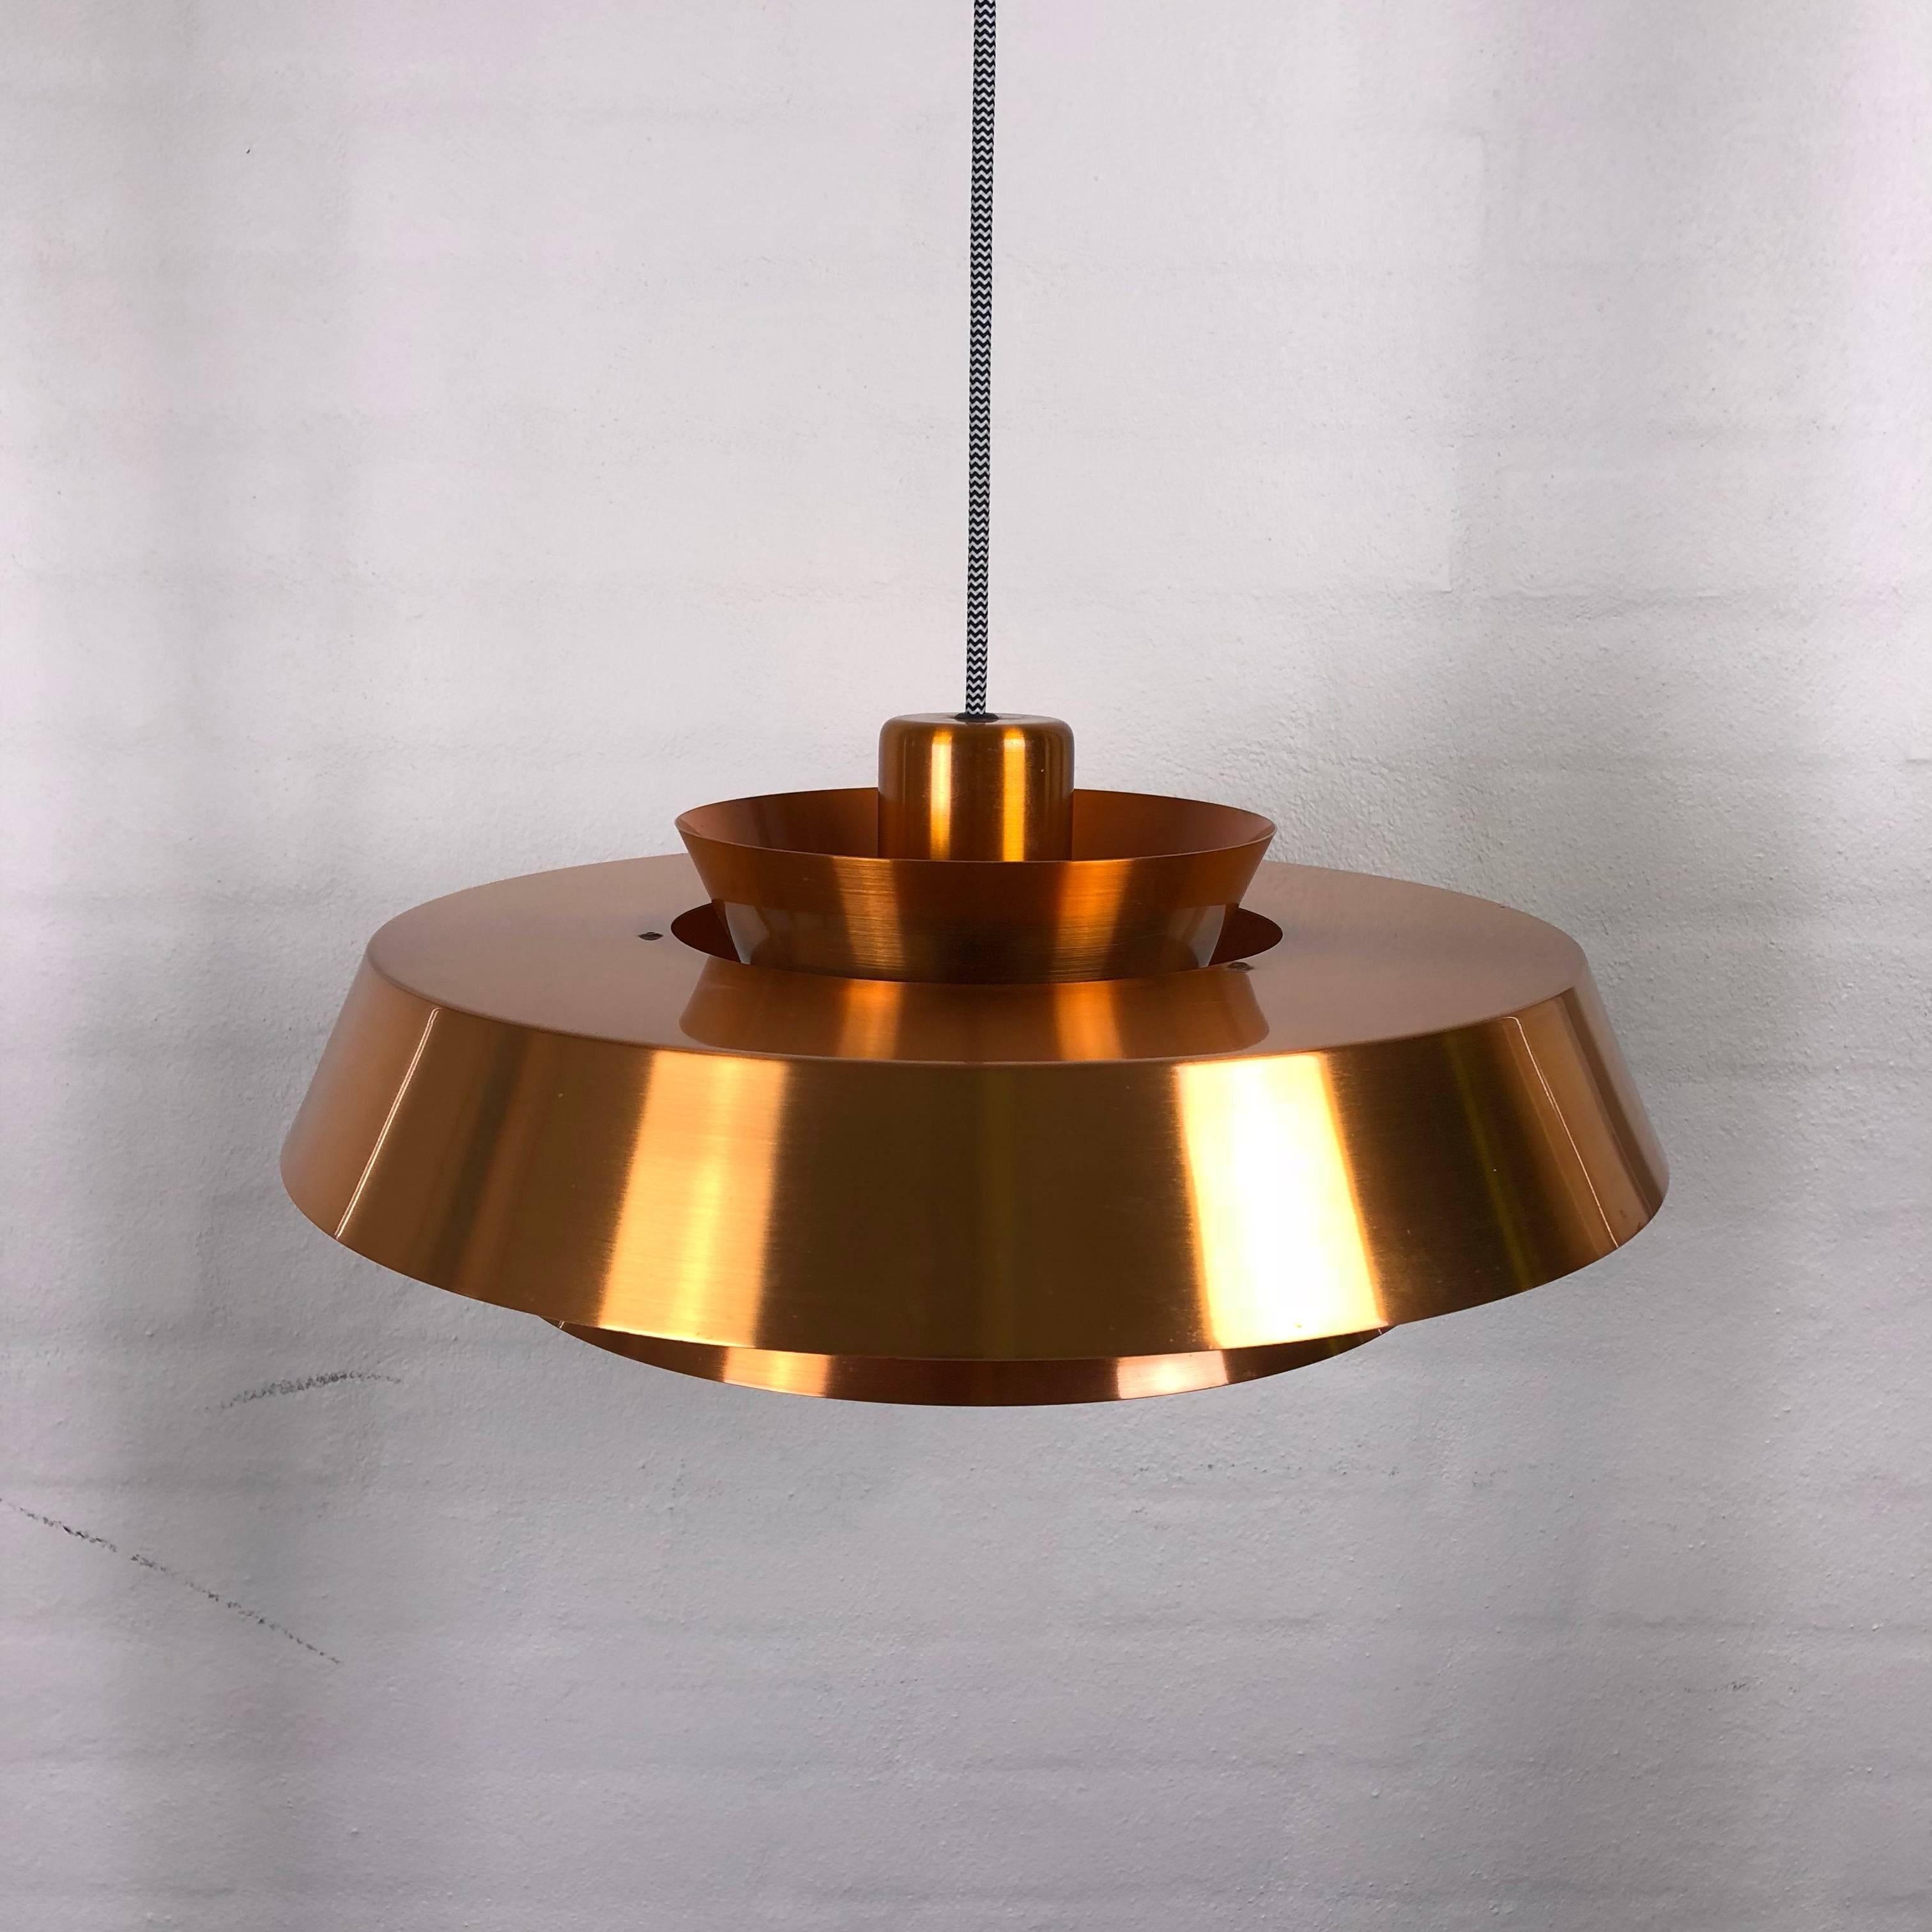 Amazing midcentury lamp - Nova - designed in 1960s by Danish Jo Hammerborg for Fog and Mørup.

The pendant i a classic Danish design and very popular.

The copper model is getting quite rare, so we are pleased to offer you it here.

The inner